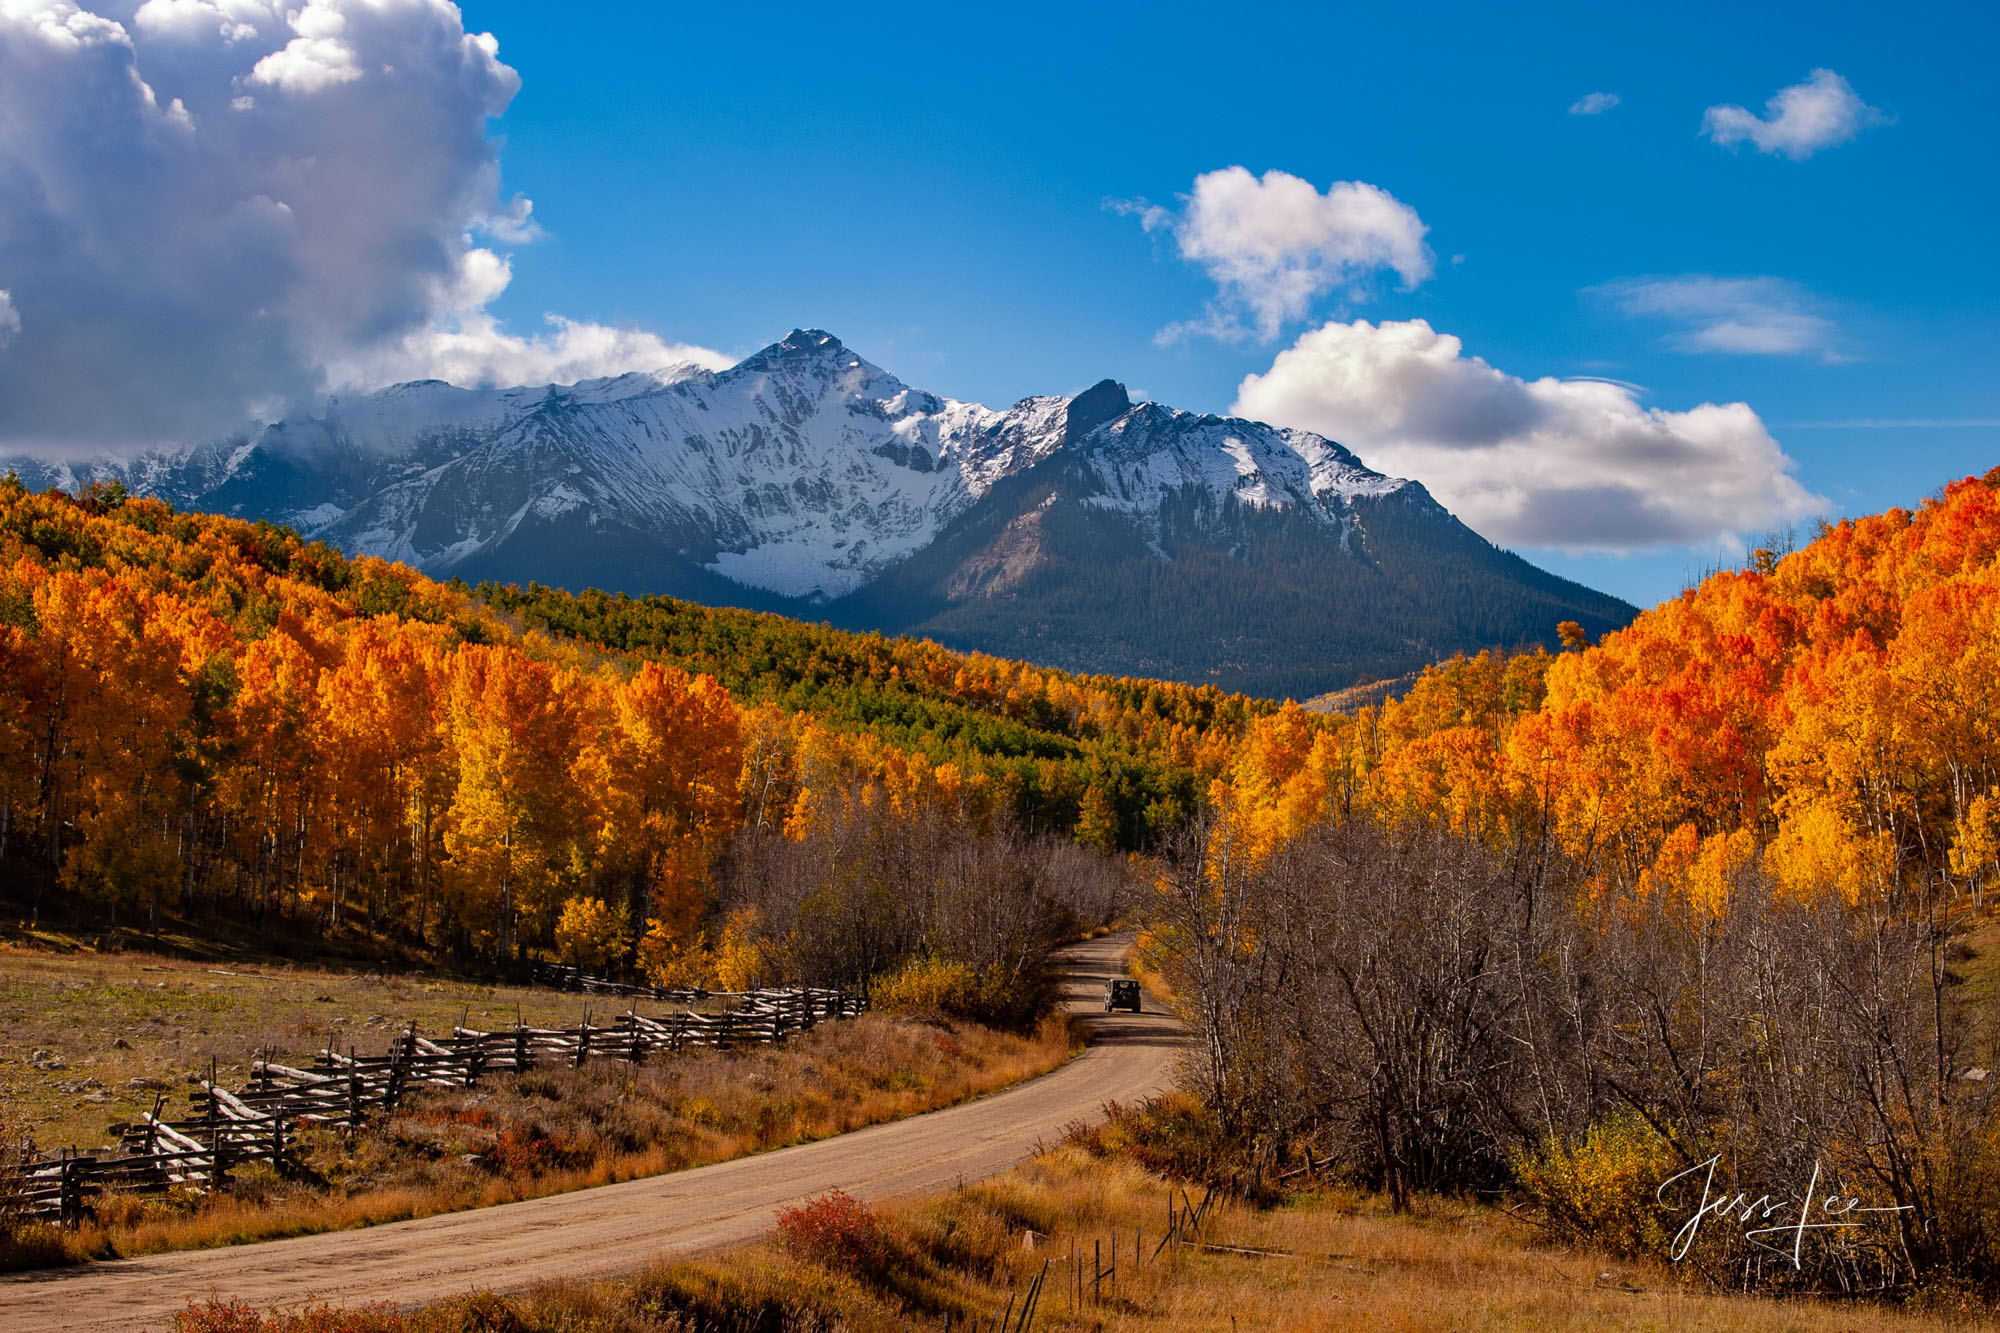 Fine Art Limited Edition Photography of Colorado. Colorado Autumn Landscapes.This is part of the luxurious collection of fine...